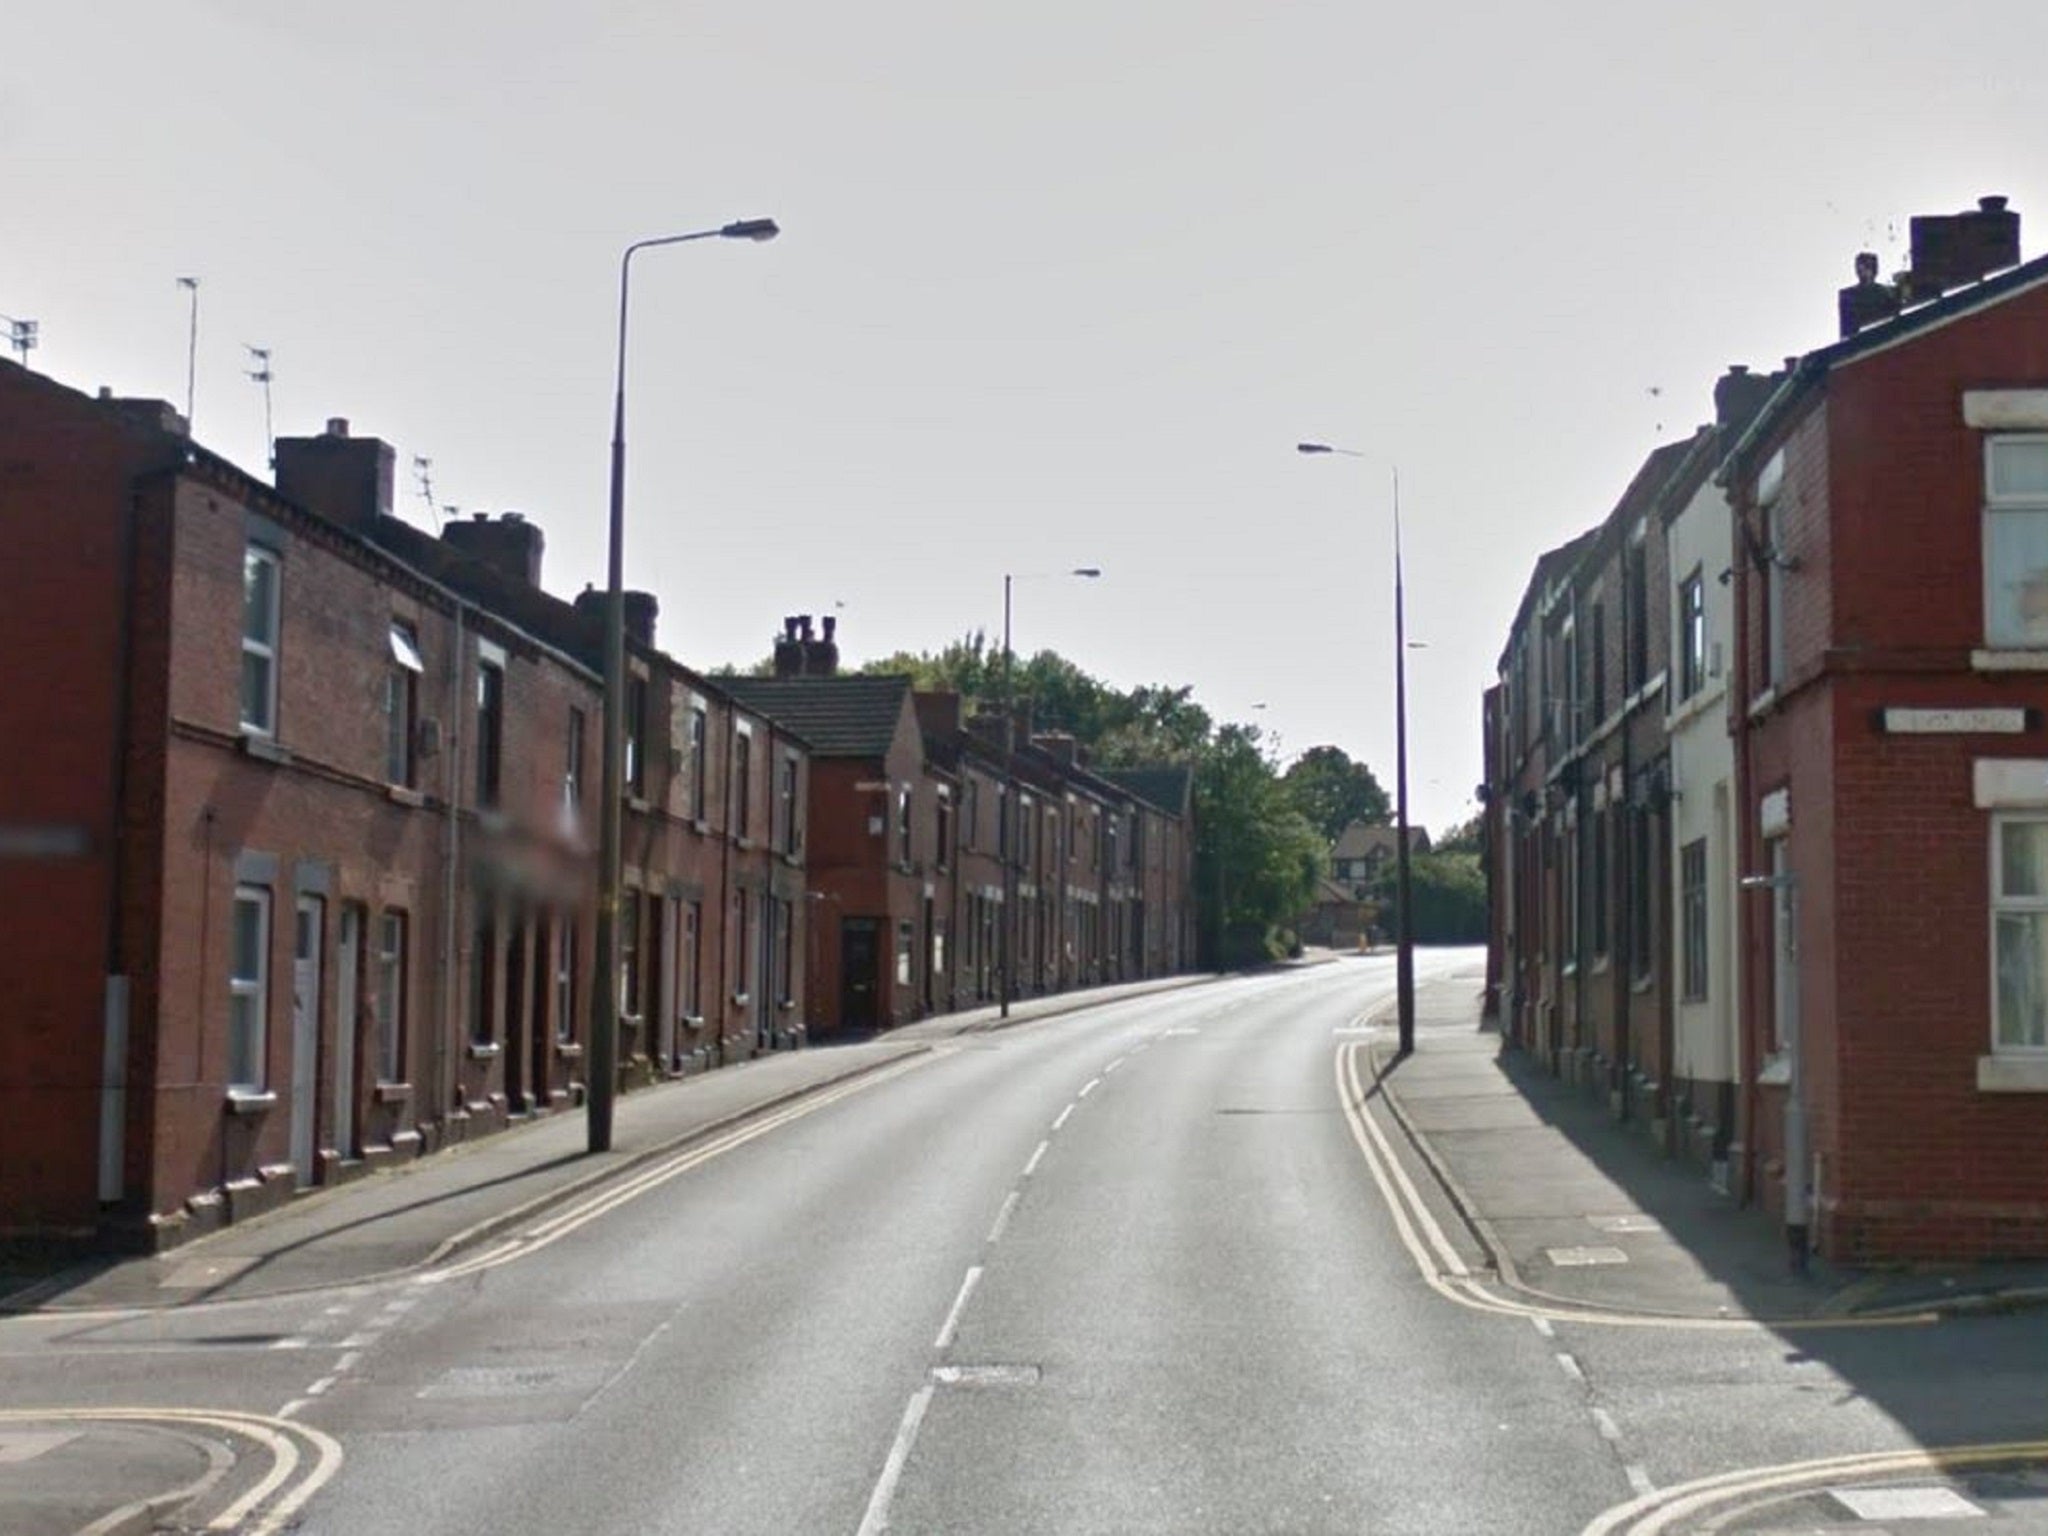 Google Street View image of Borough Road in St Helens, where the woman suffered a fatal head injury